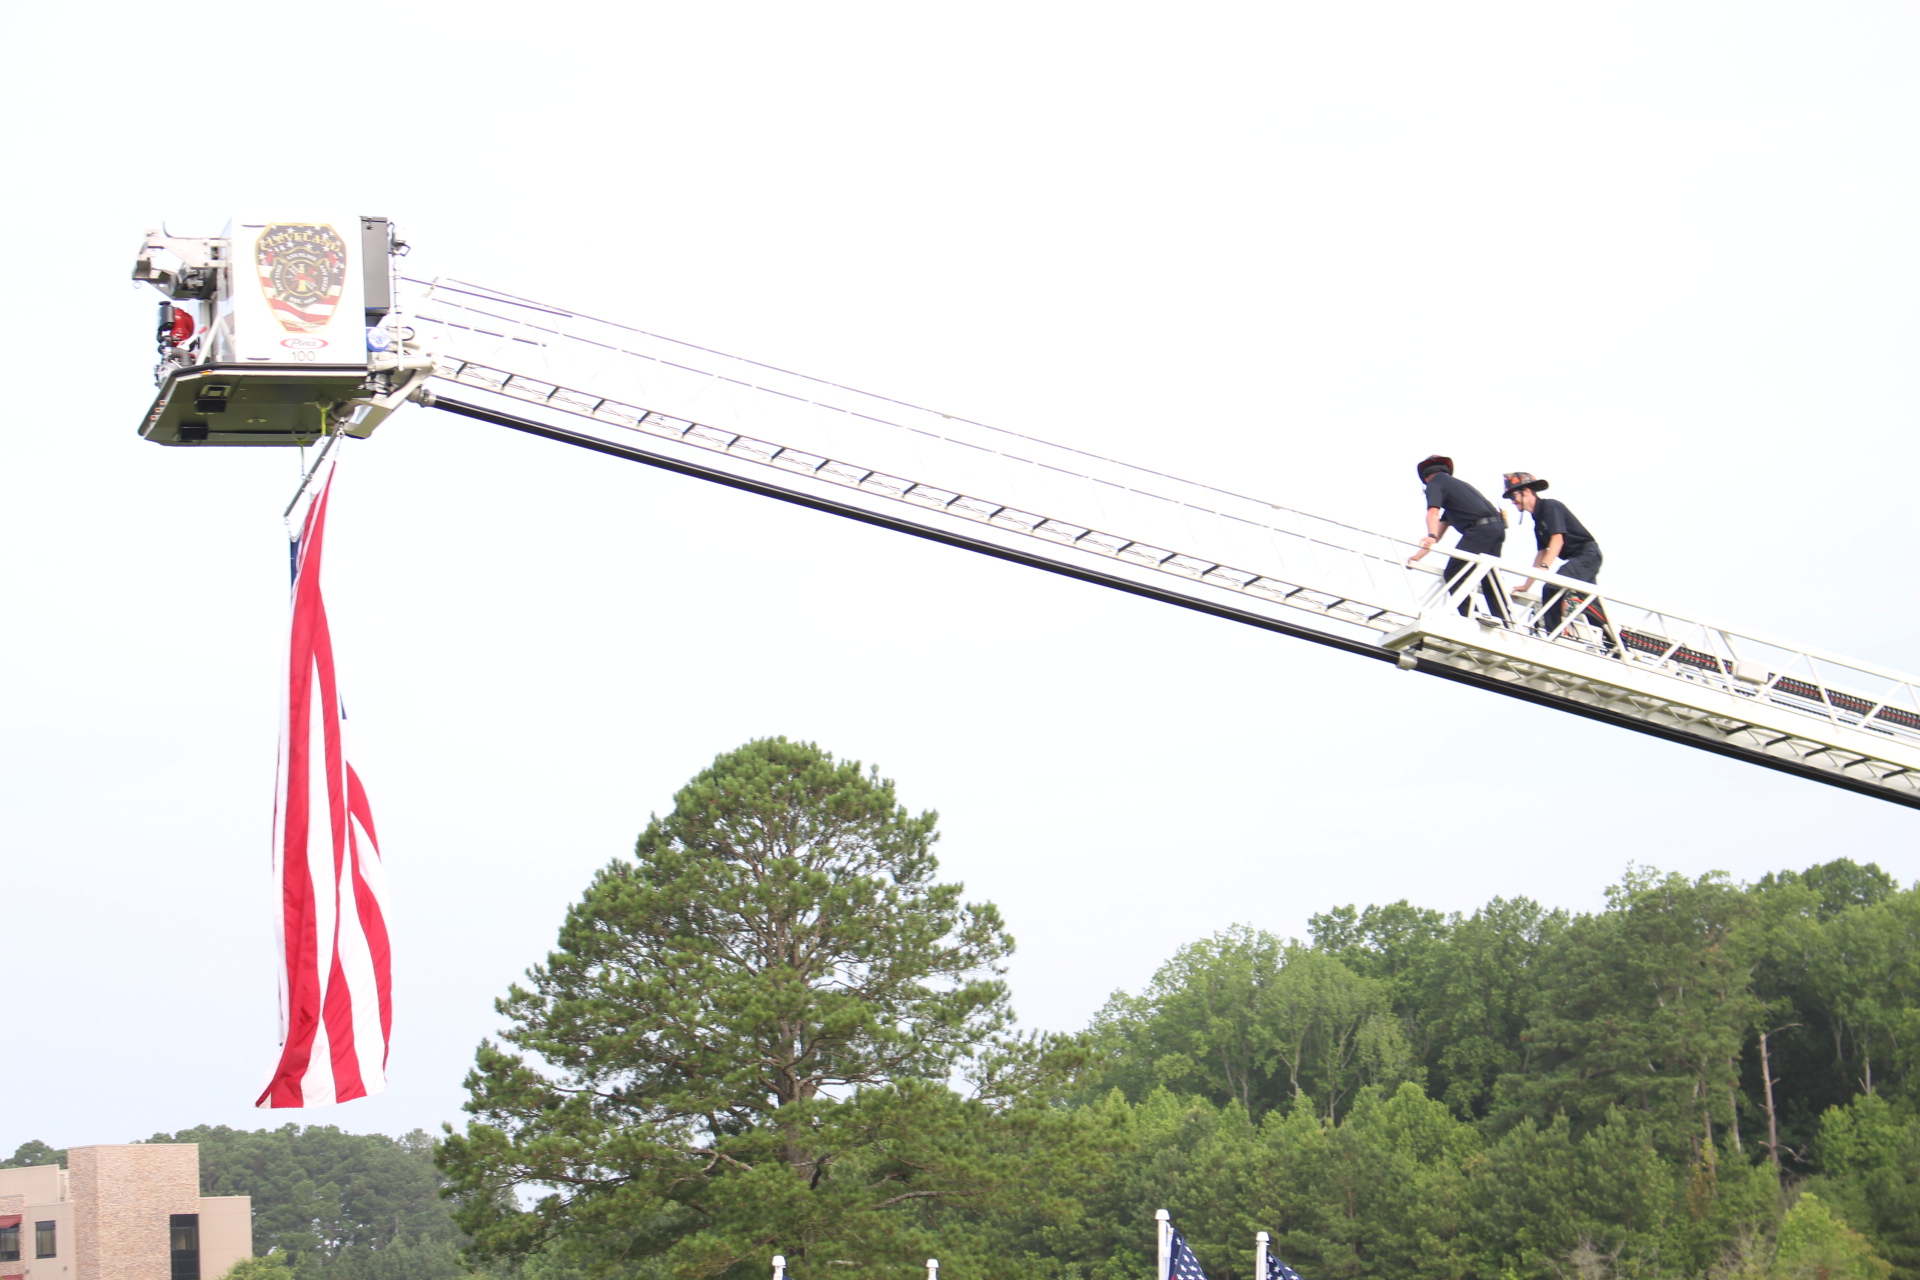 Cleveland Fire Department using their ladder truck to fly a huge flag at Flags For Heroes 2020